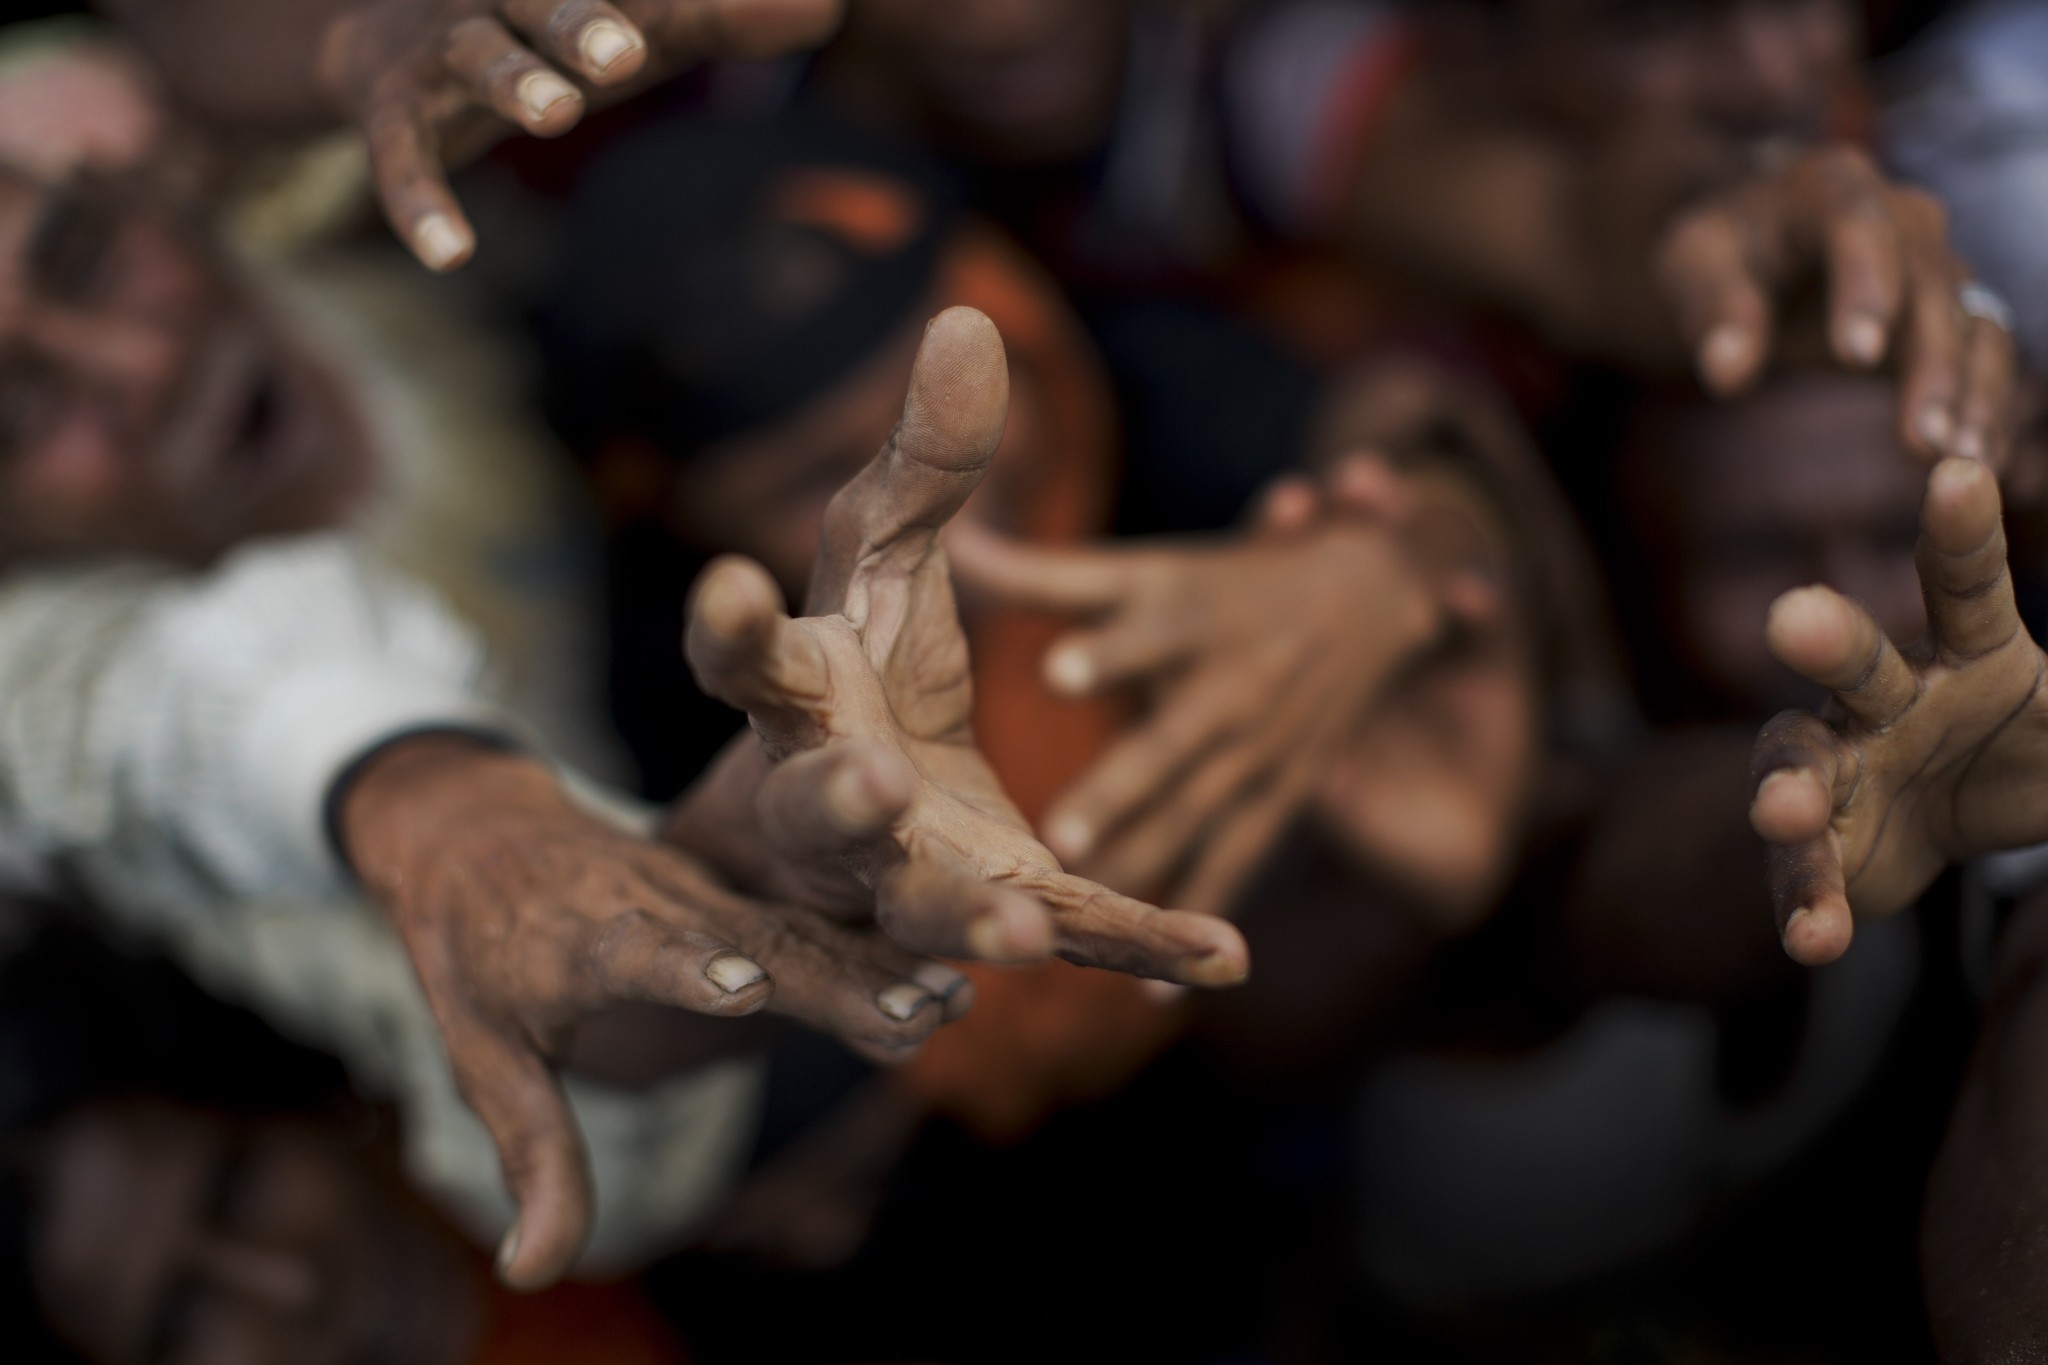 Newly arrived Rohingya stretch out their hands to receive puffed rice food rations donated by local volunteers in Kutupalong, Bangladesh, Sept. 9, 2017. (AP Photo)